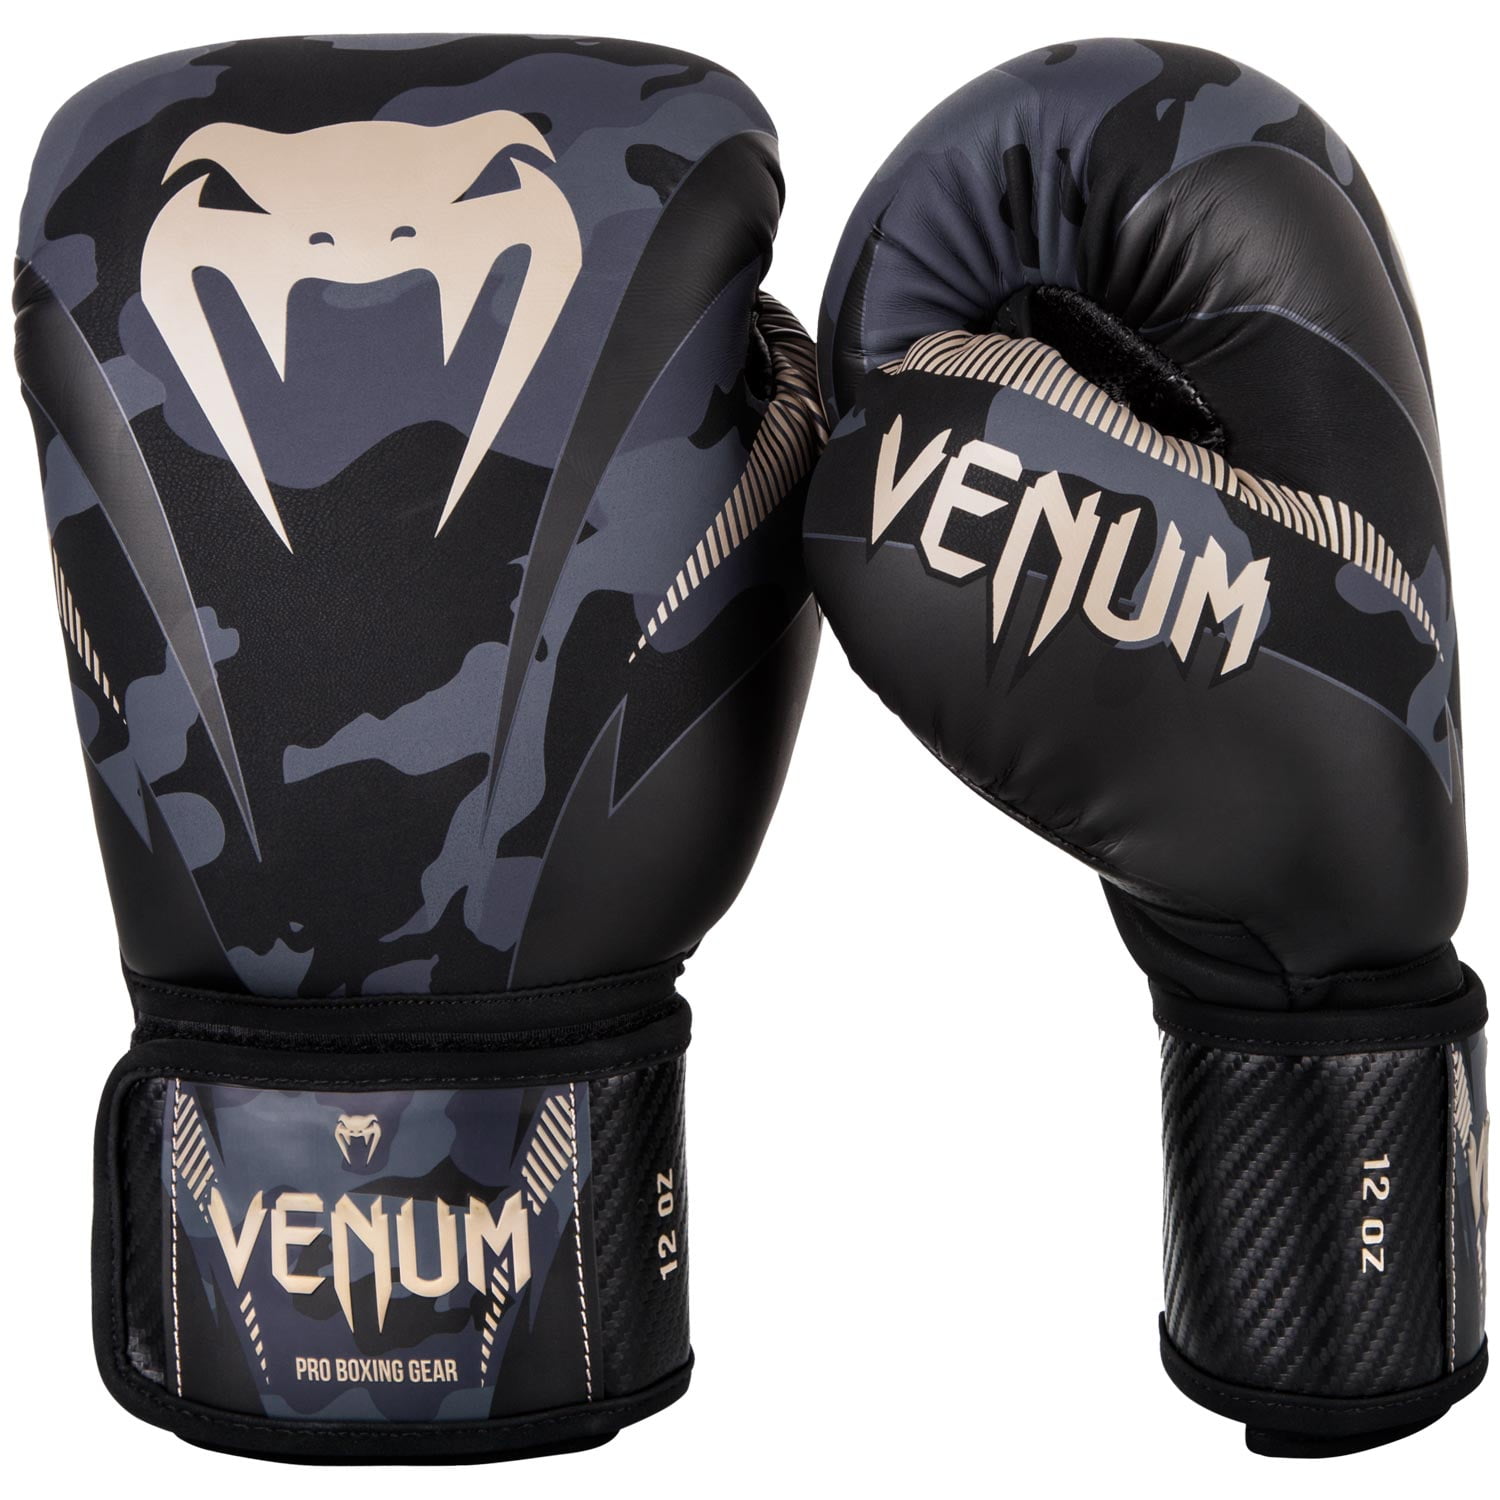 Toys & Games Sports & Outdoor Recreation Martial Arts & Boxing Boxing Gloves Customized Winning Boxing Gloves 